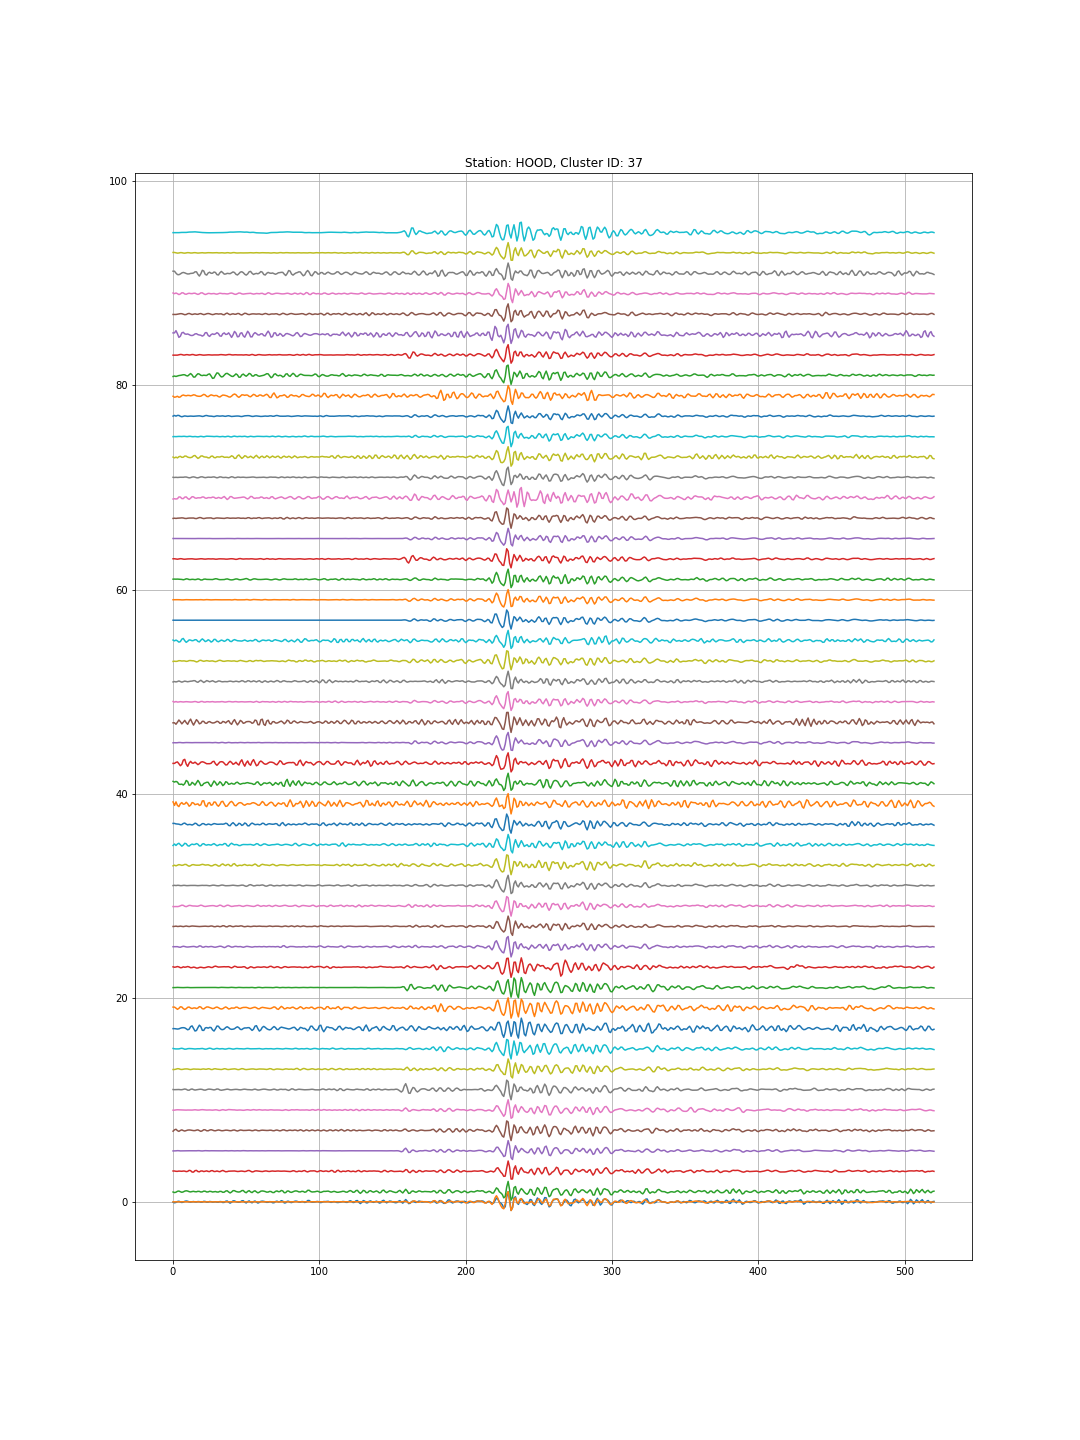 Repeating events from REDPy at station CC.HOOD (Mt. Hood), each waveform happens at a different time but has a high enough similarity to be grouped into the same cluster.